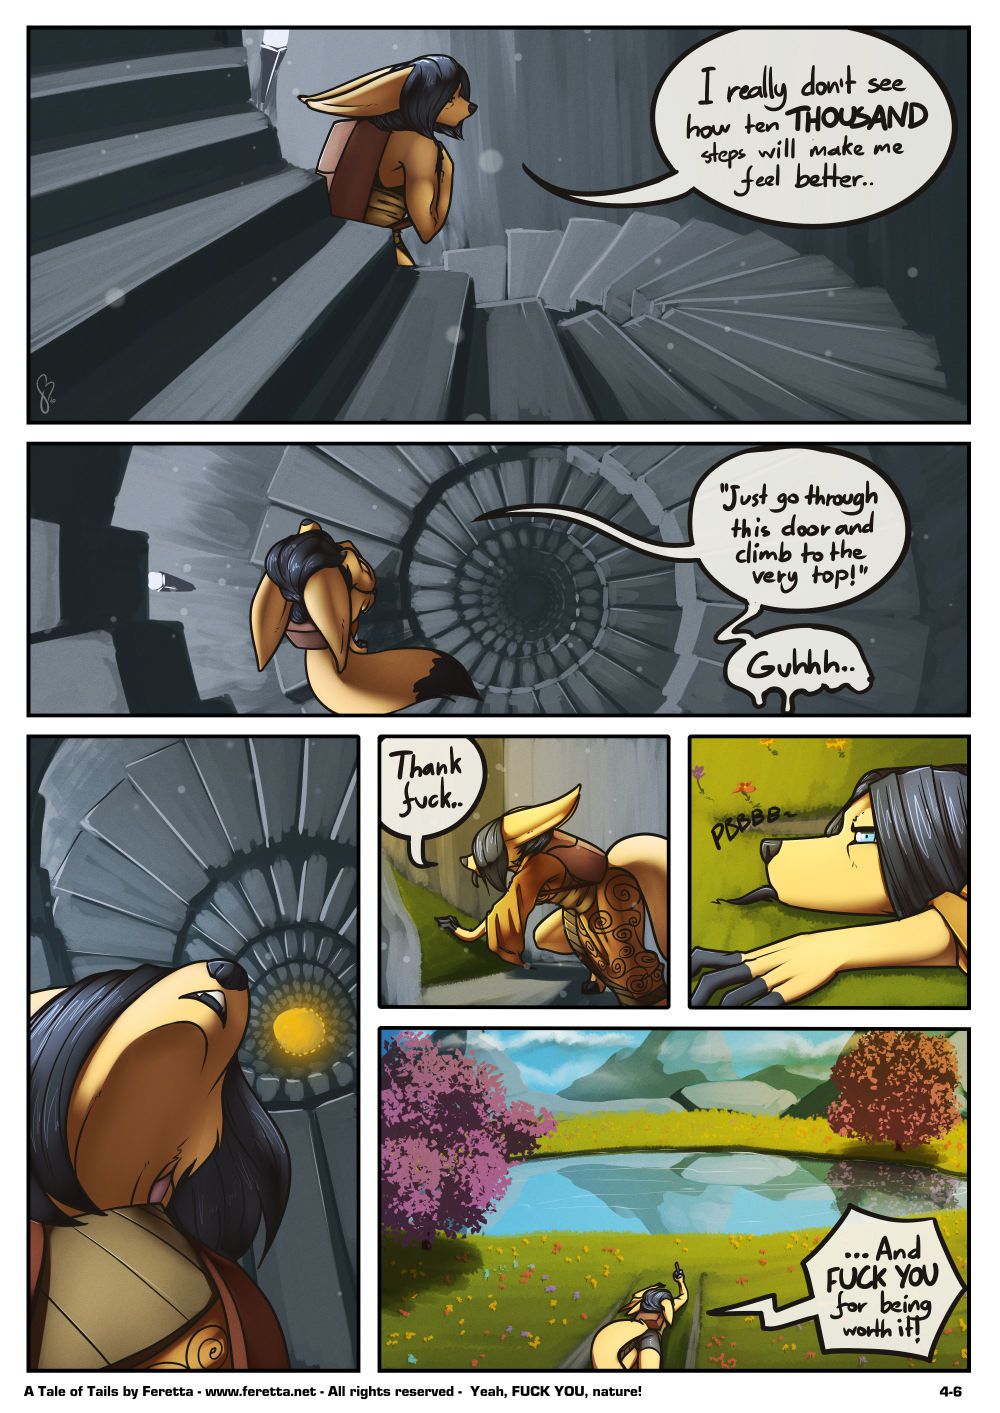 [Feretta] A Tale of Tails: Chapter 4 -  Matters of the mind [Ongoing] 6